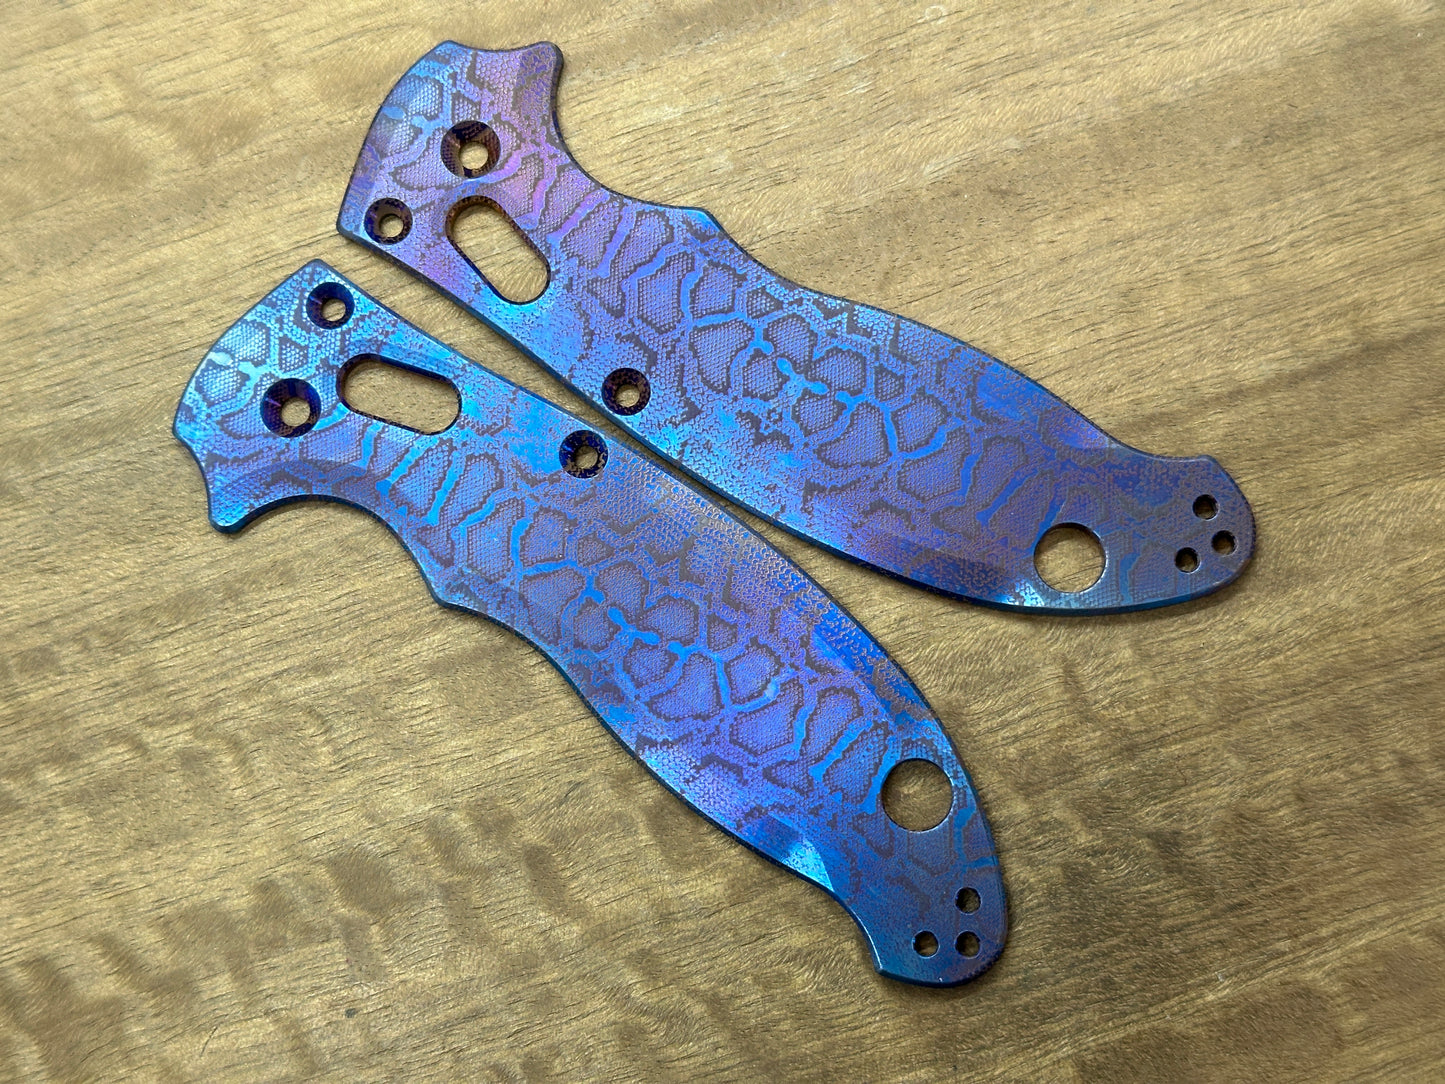 Flamed REPTILIAN engraved Titanium scales for Spyderco MANIX 2